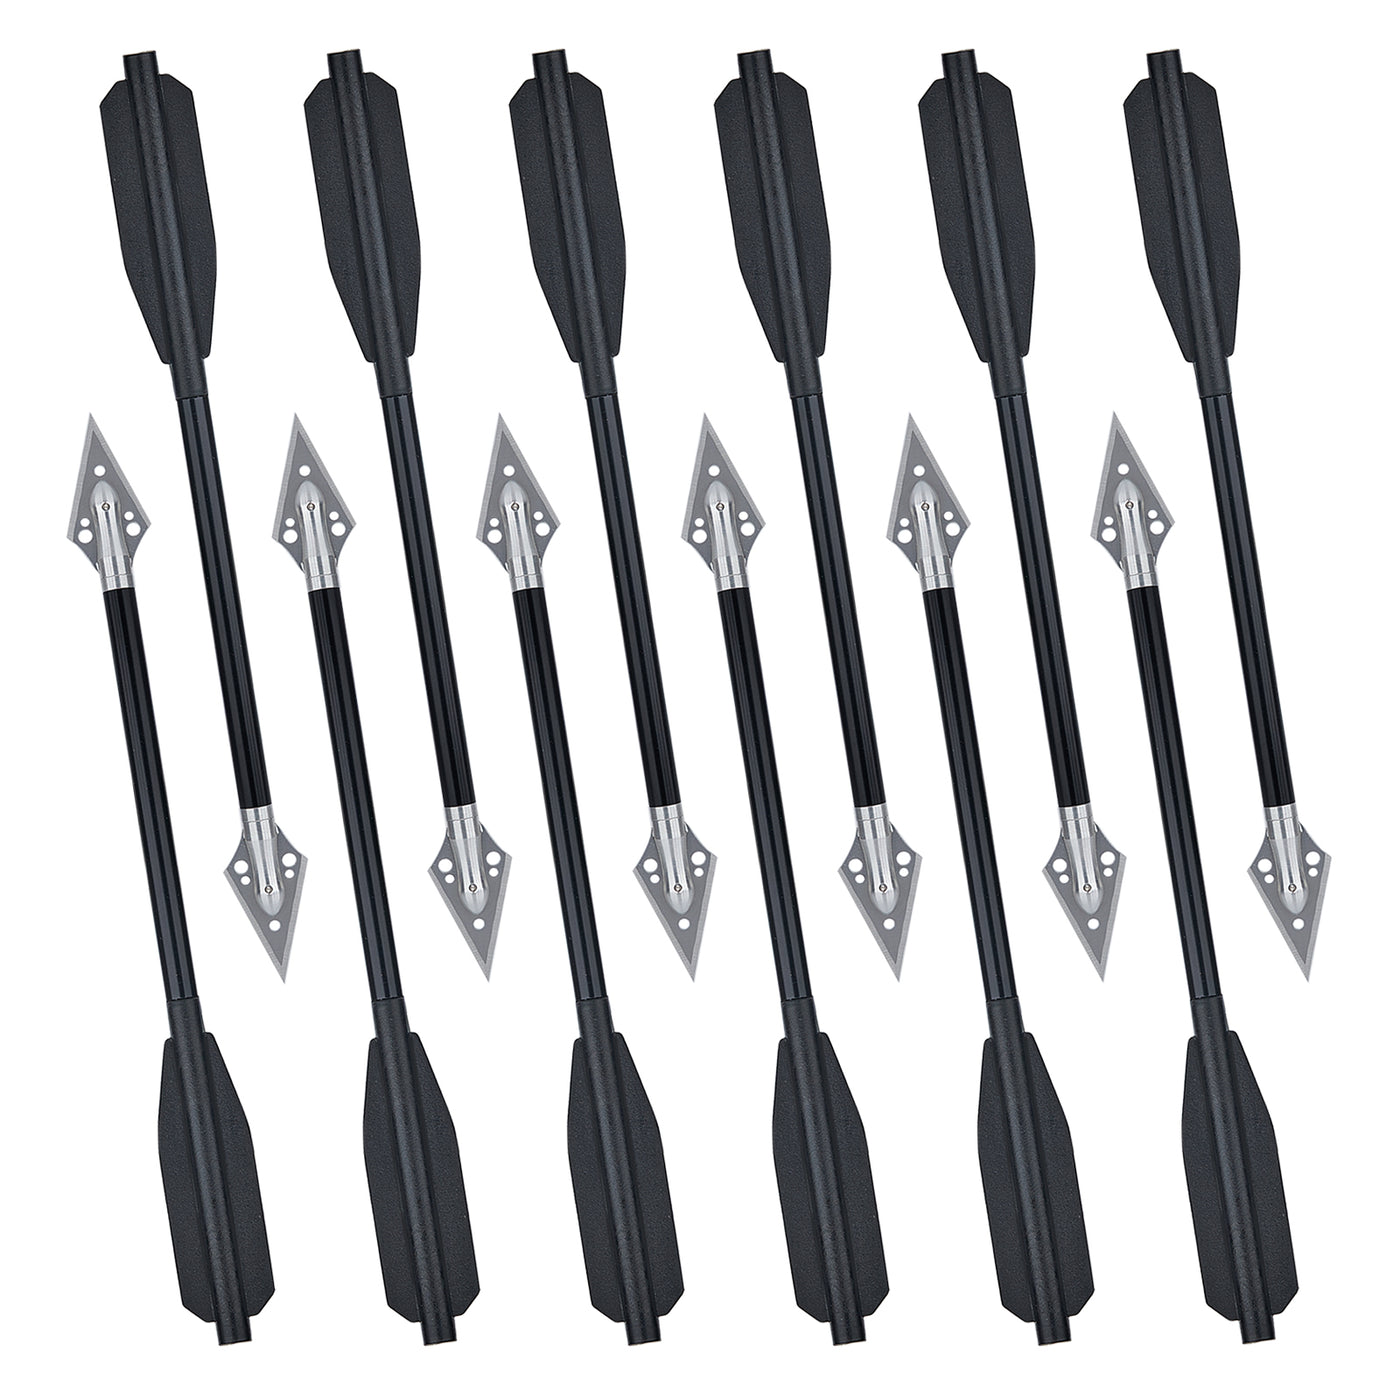 12x 6.5" Archery Aluminum Crossbow Bolts Black Shafts Vanes with Replaceable Broadheads for Hunting